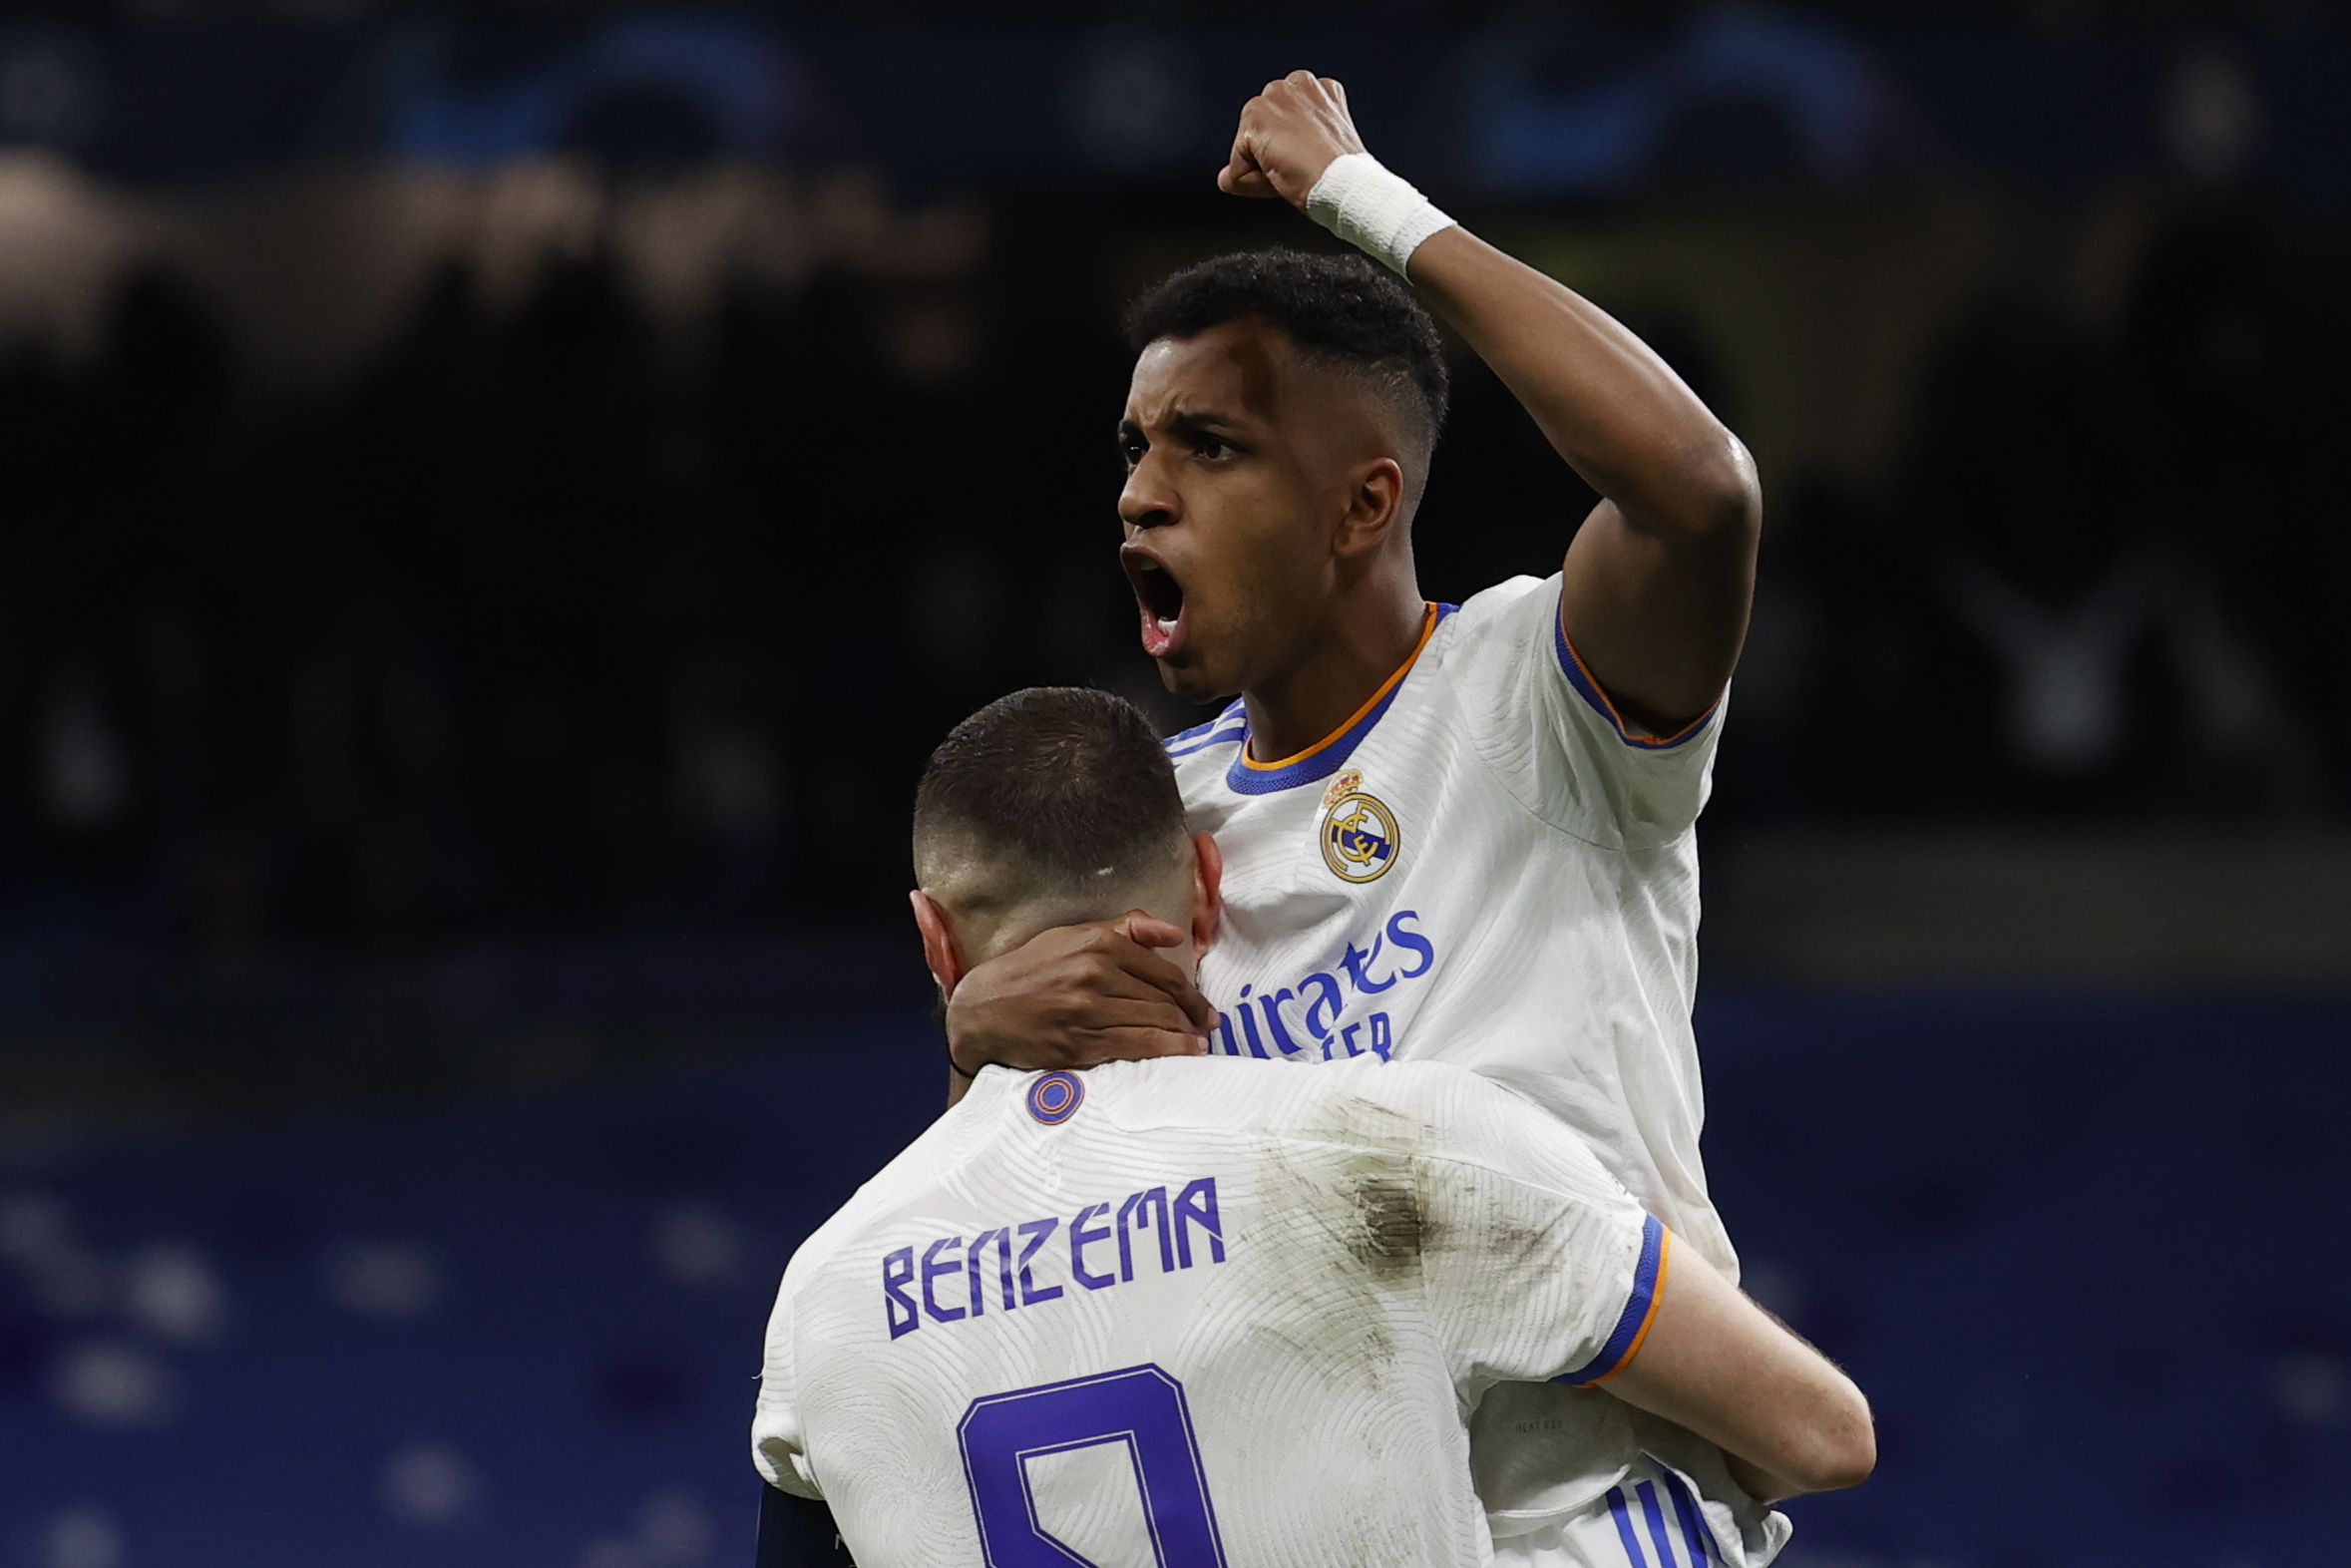 epa09886995 Real Madrid's striker Rodrygo Goes (R) celebrates after scoring the 1-3 goal during the UEFA Champions League quarter final second leg soccer match between Real Madrid and Chelsea held at Santiago Bernabeu Stadium, in Madrid, Spain, 12 April 2022.  EPA/Sergio Perez